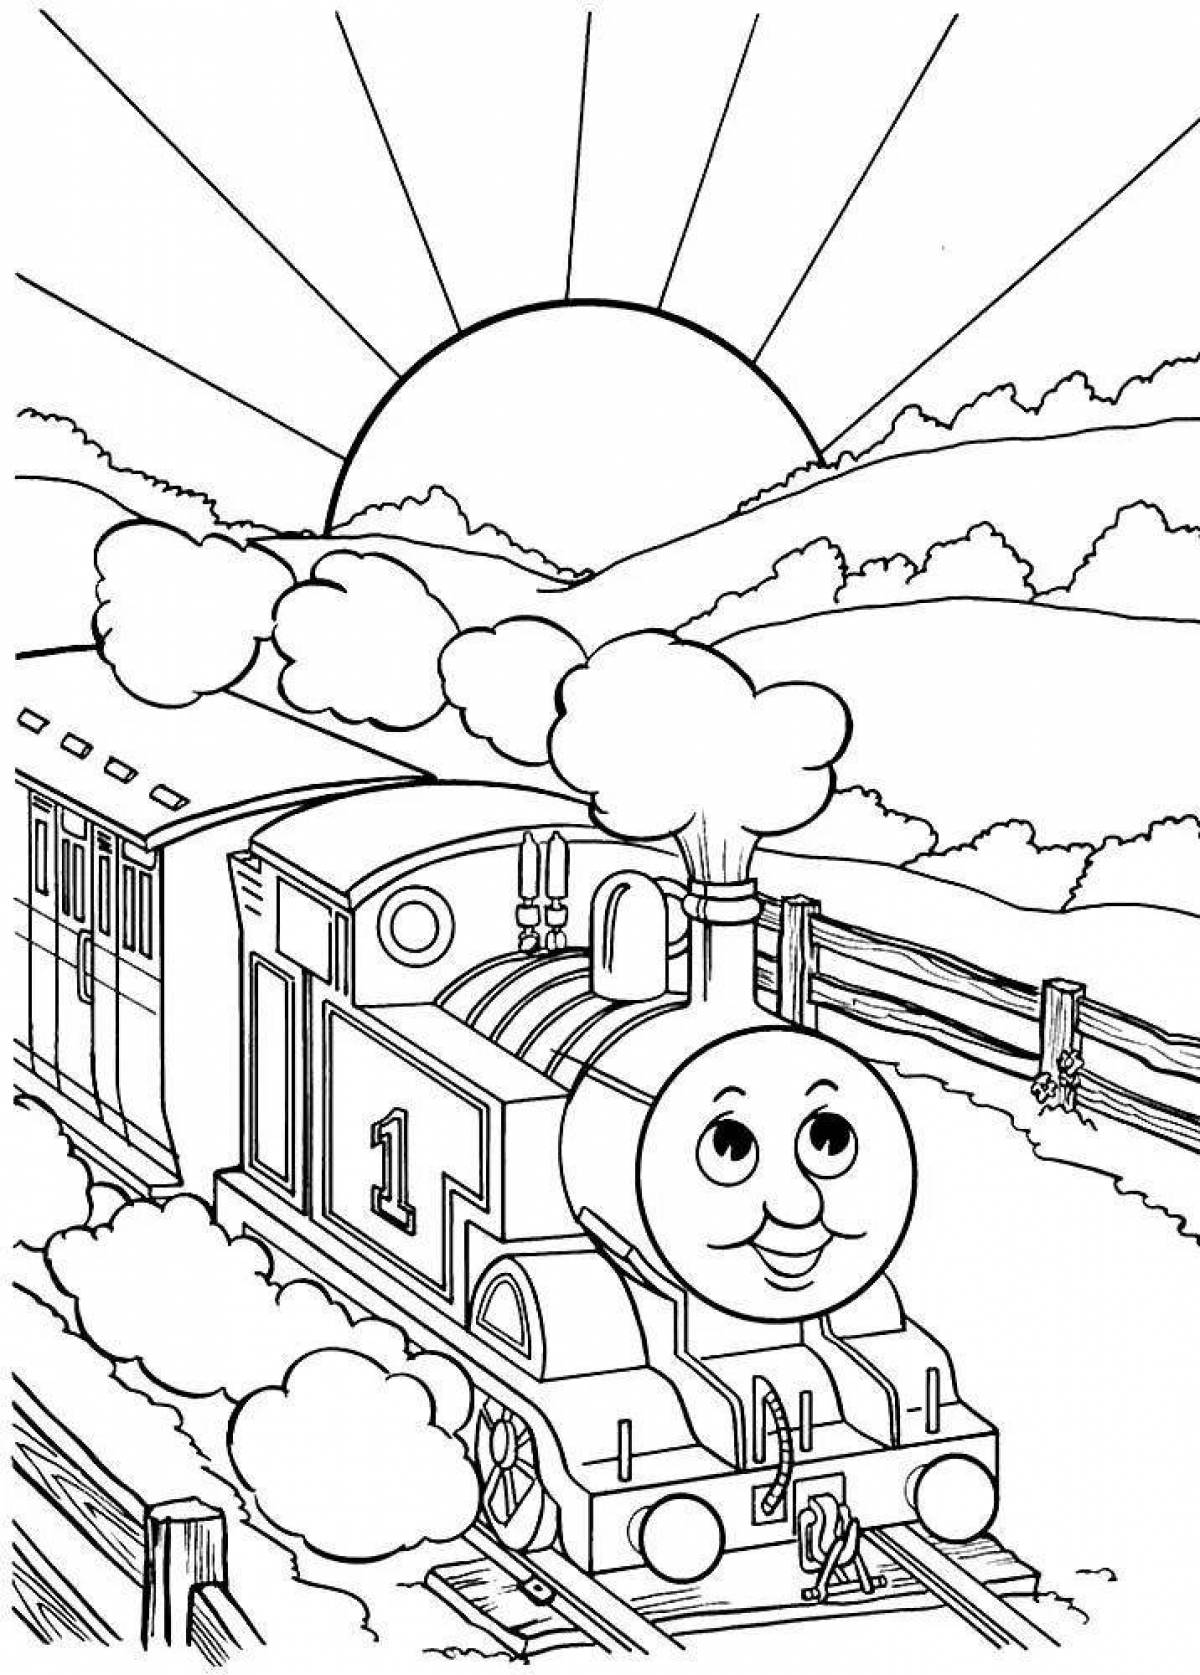 Drawing thomas the tank engine coloring pages for kids